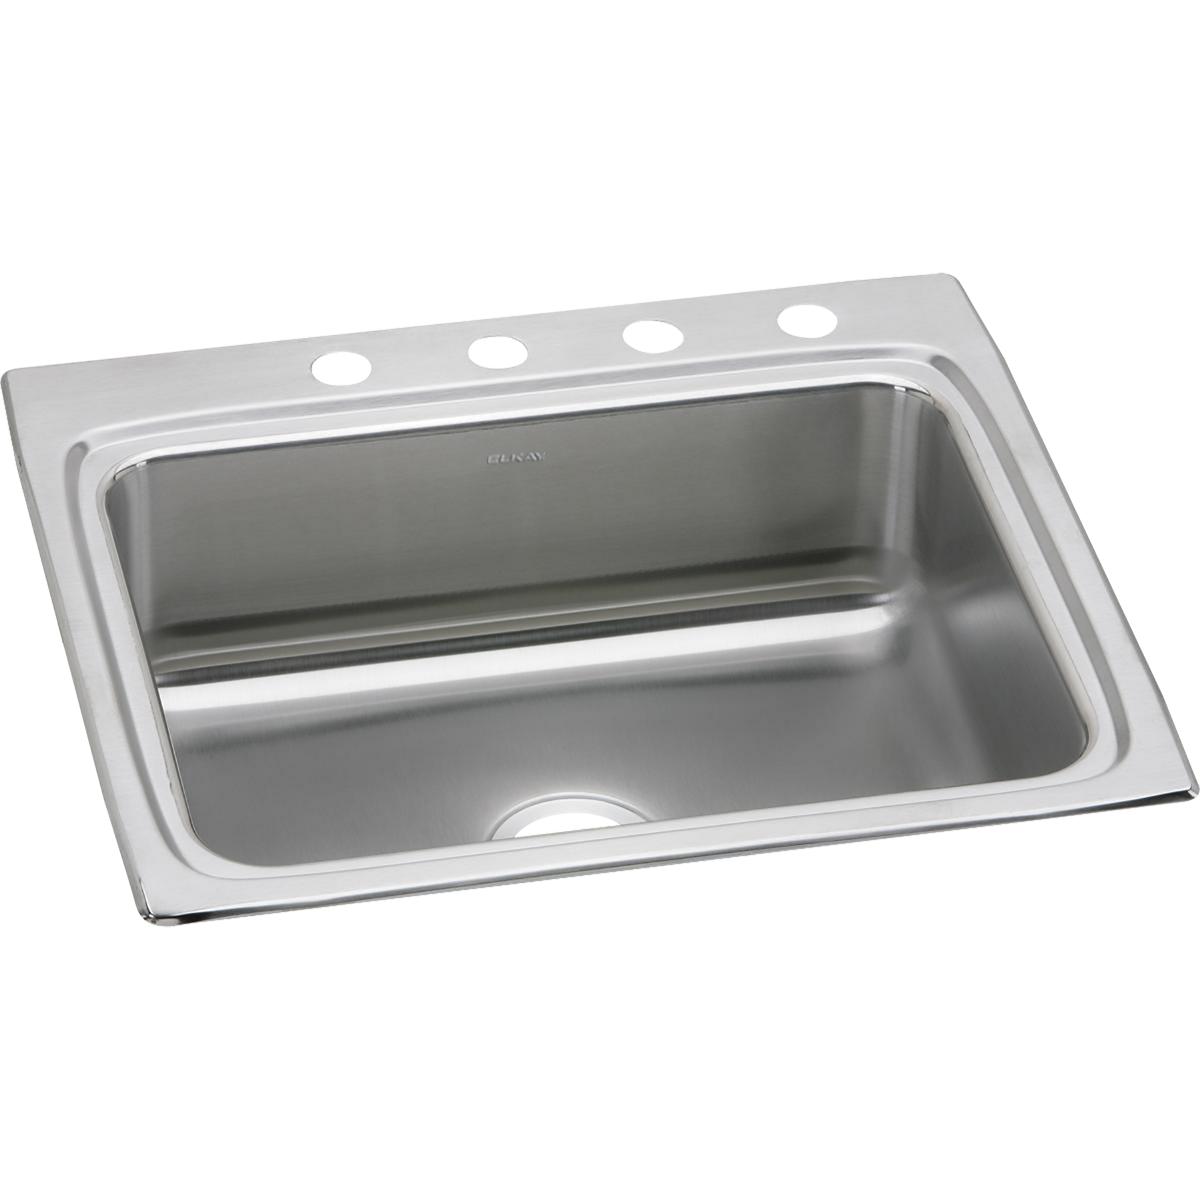 Elkay Lustertone Classic 25" x 22" x 8-1/8" Single Bowl Drop-in Sink with Quick-clip